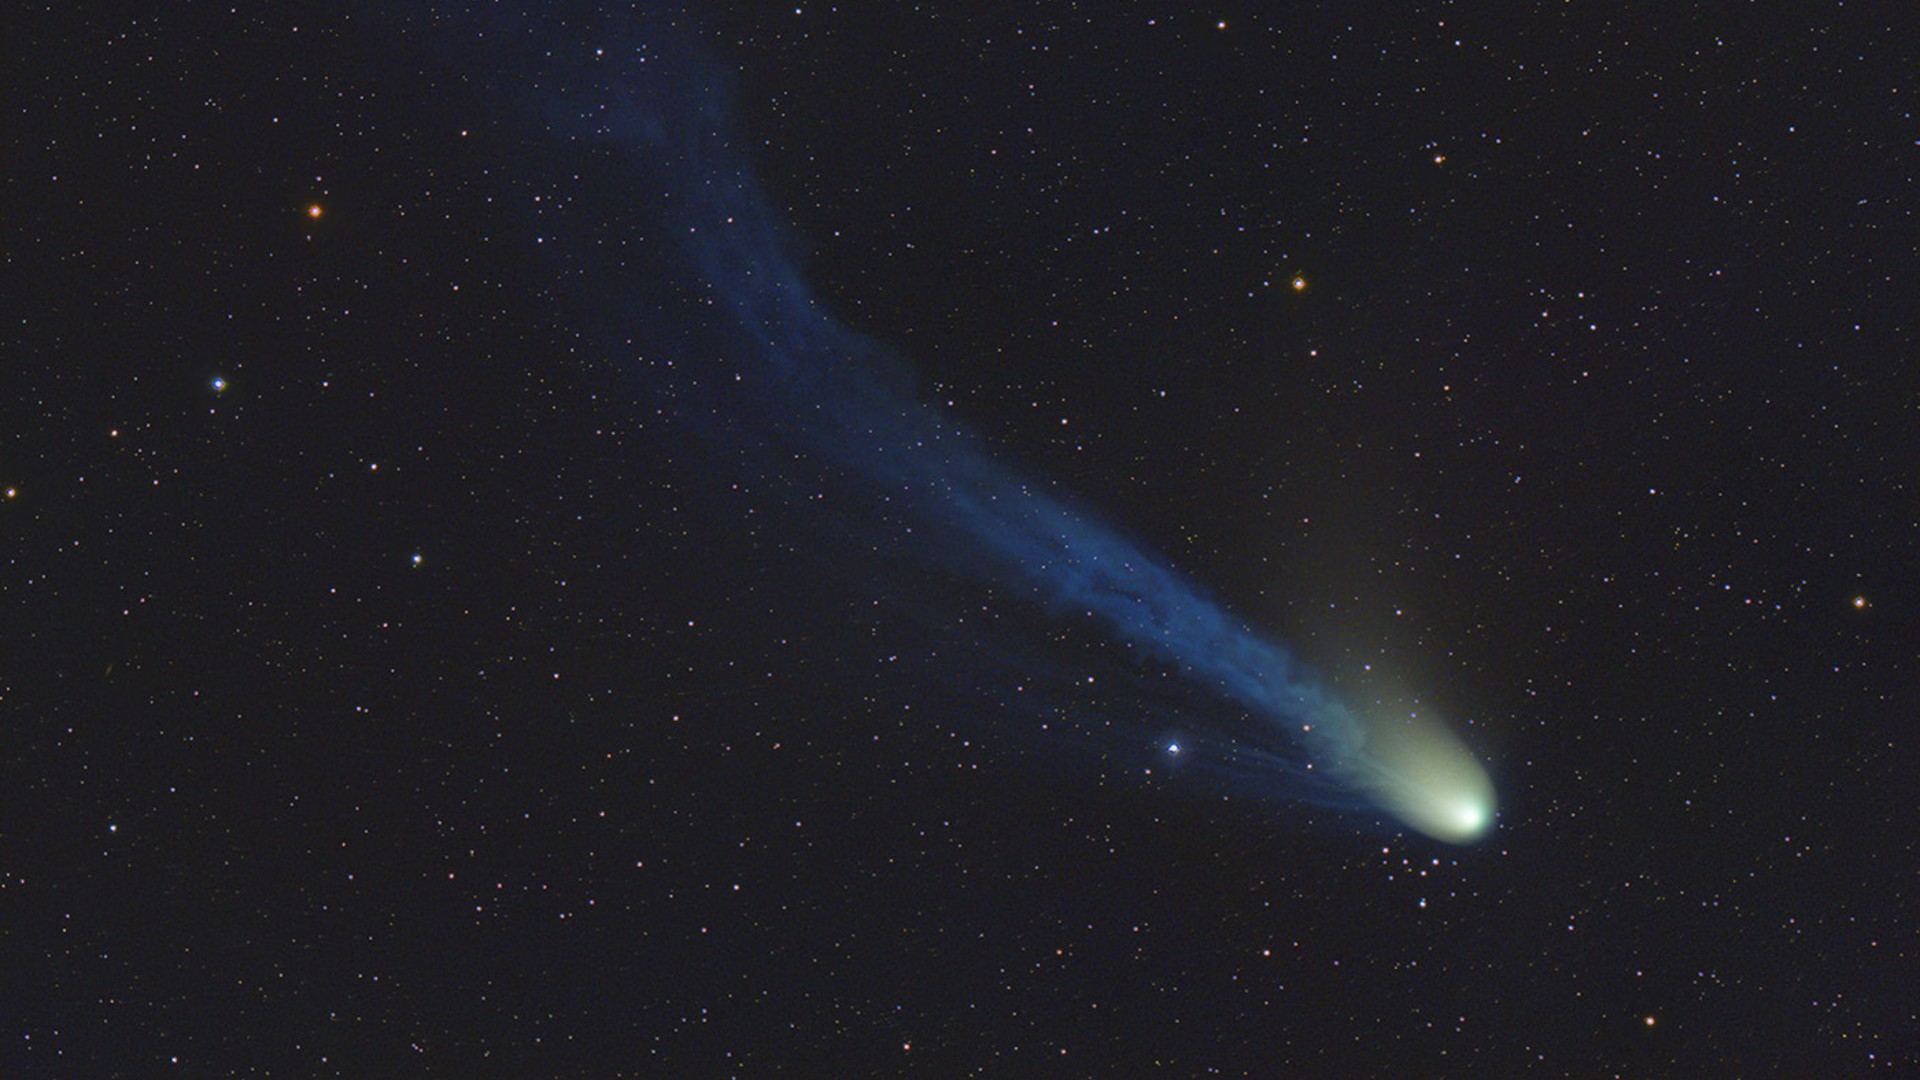 ‘Devil Comet’ 12P/Pons-Brooks reaches peak brightness tonight. Here’s how to see it Space